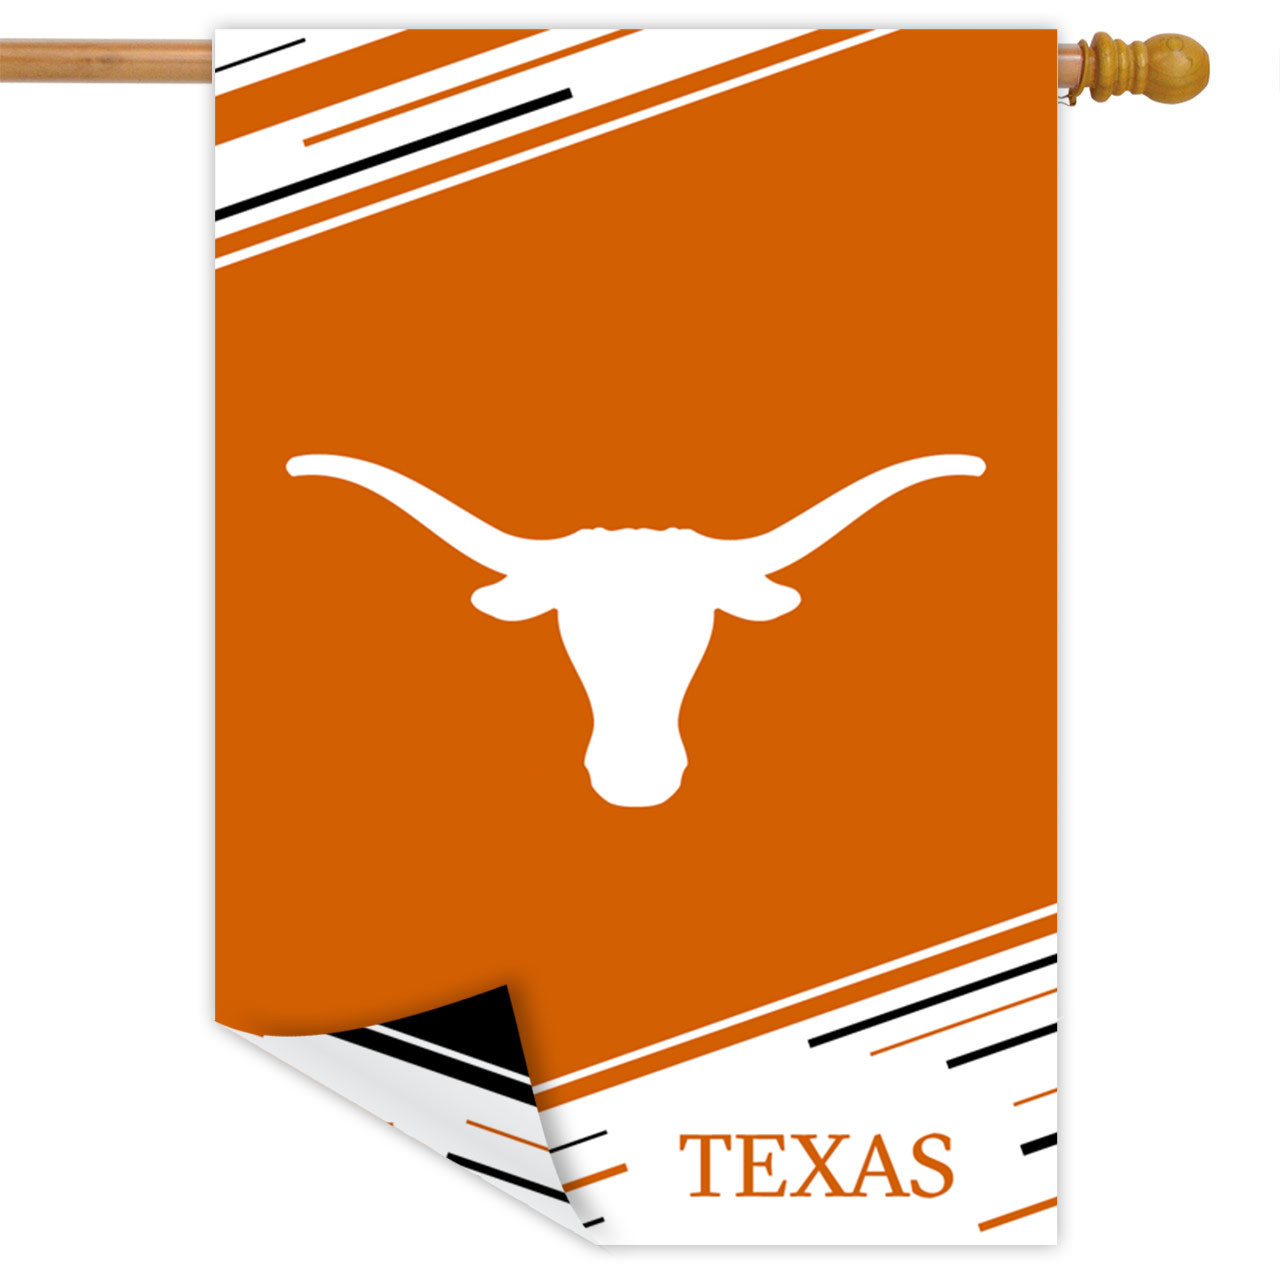 The University of Texas NCAA Licensed Double-Sided House Flag ...